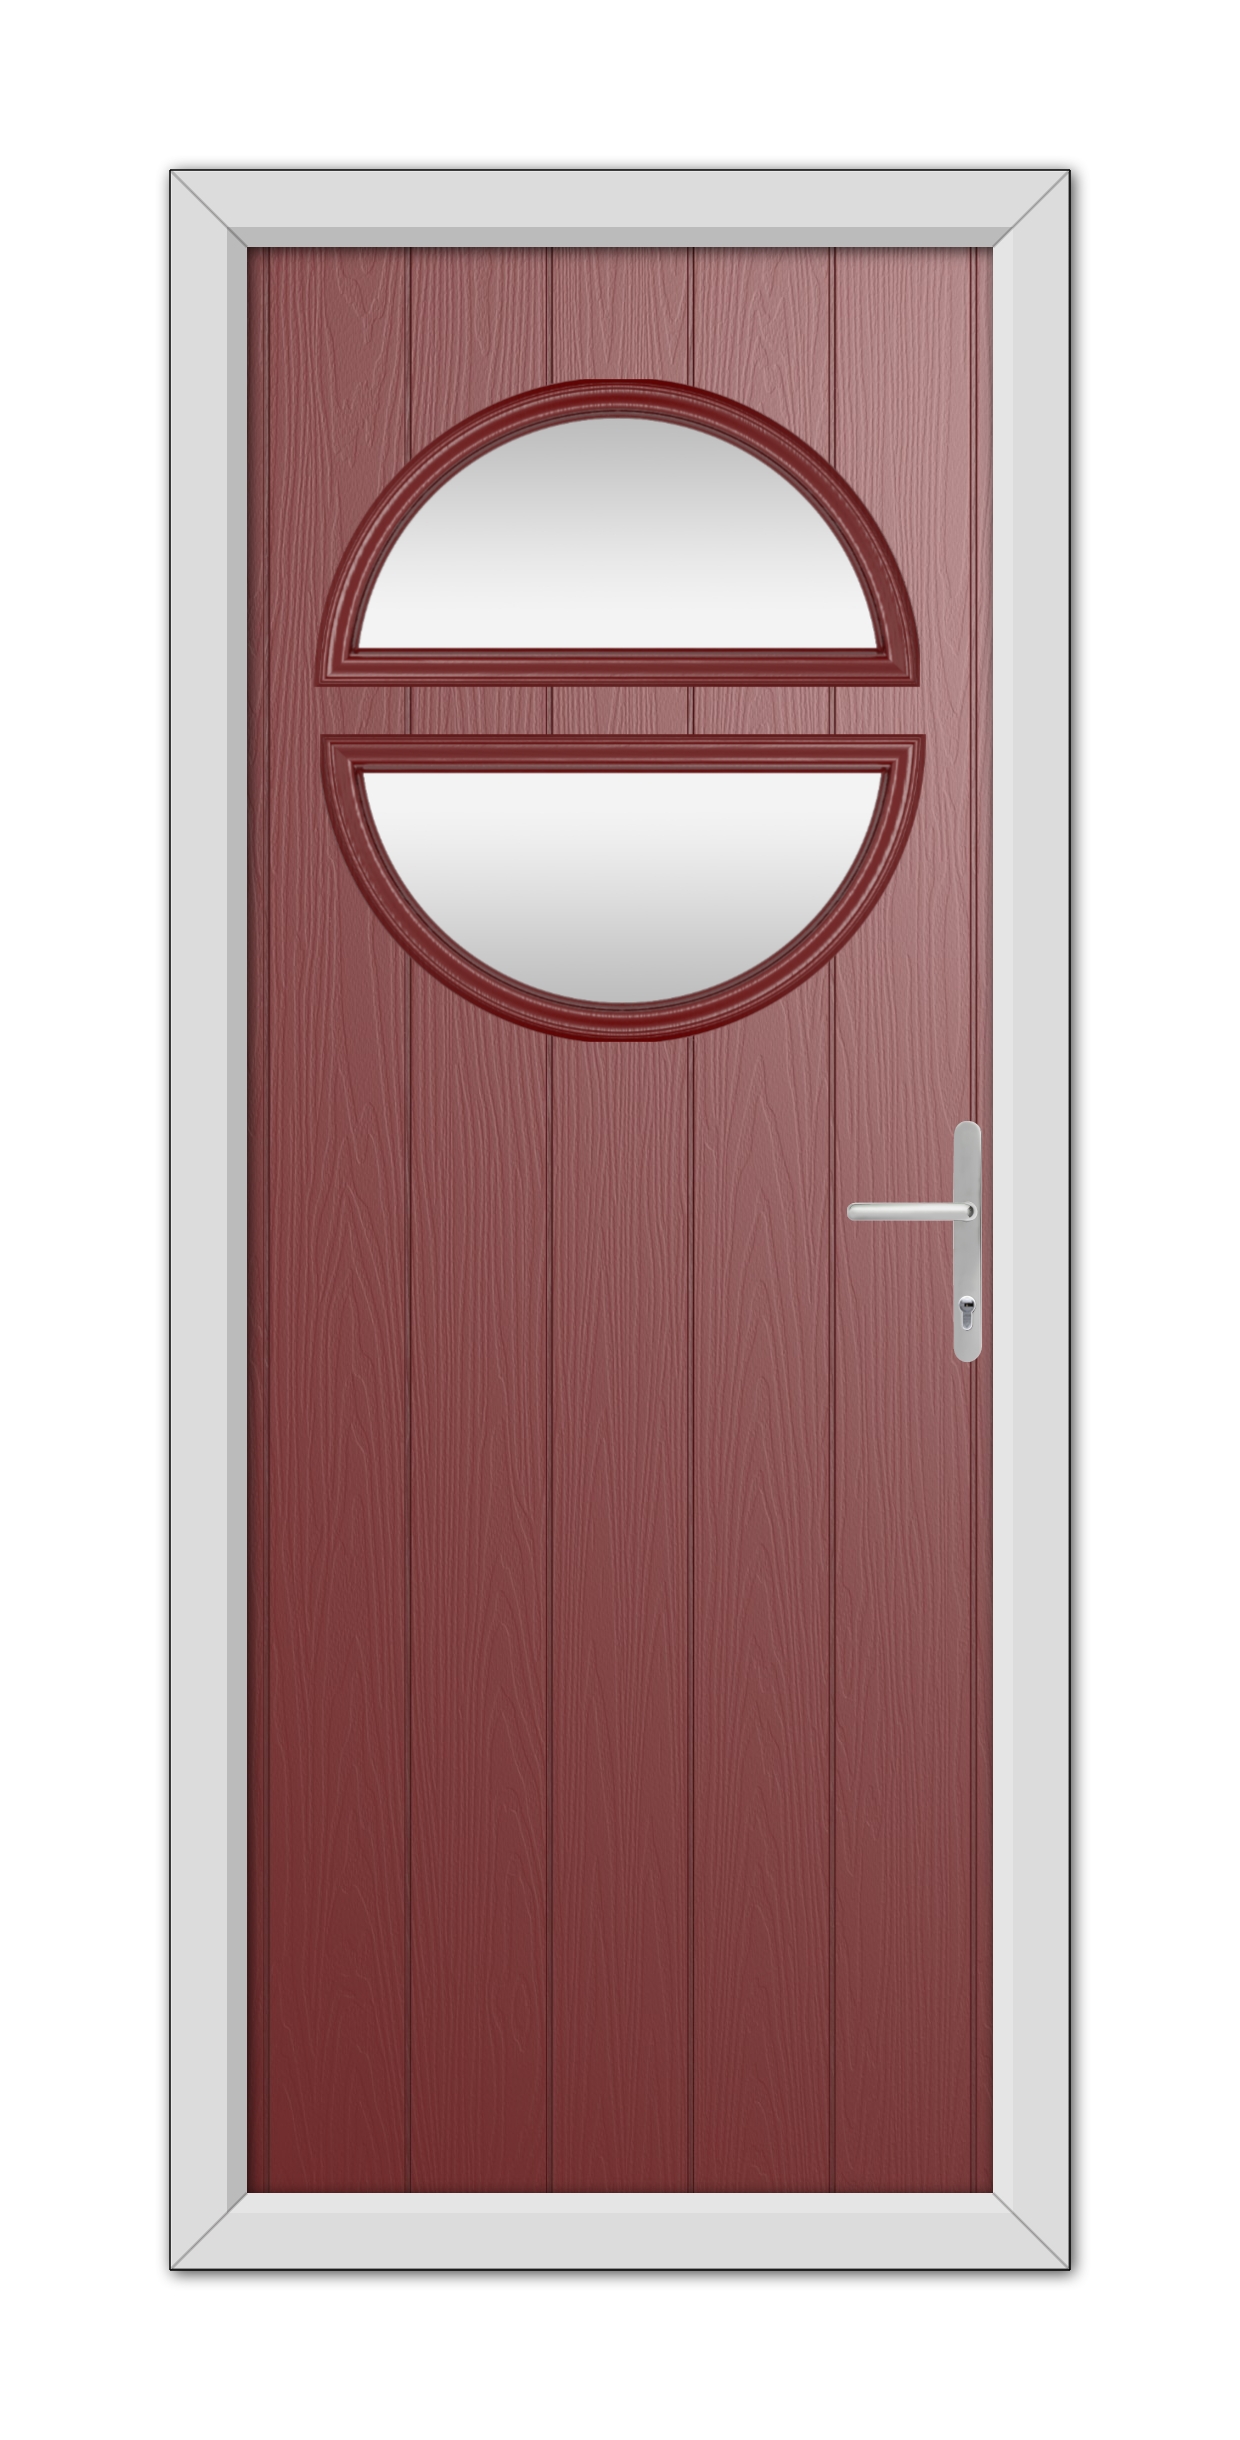 A modern Red Kent Composite Door 48mm Timber Core with an oval glass window and a silver handle, set in a white frame.